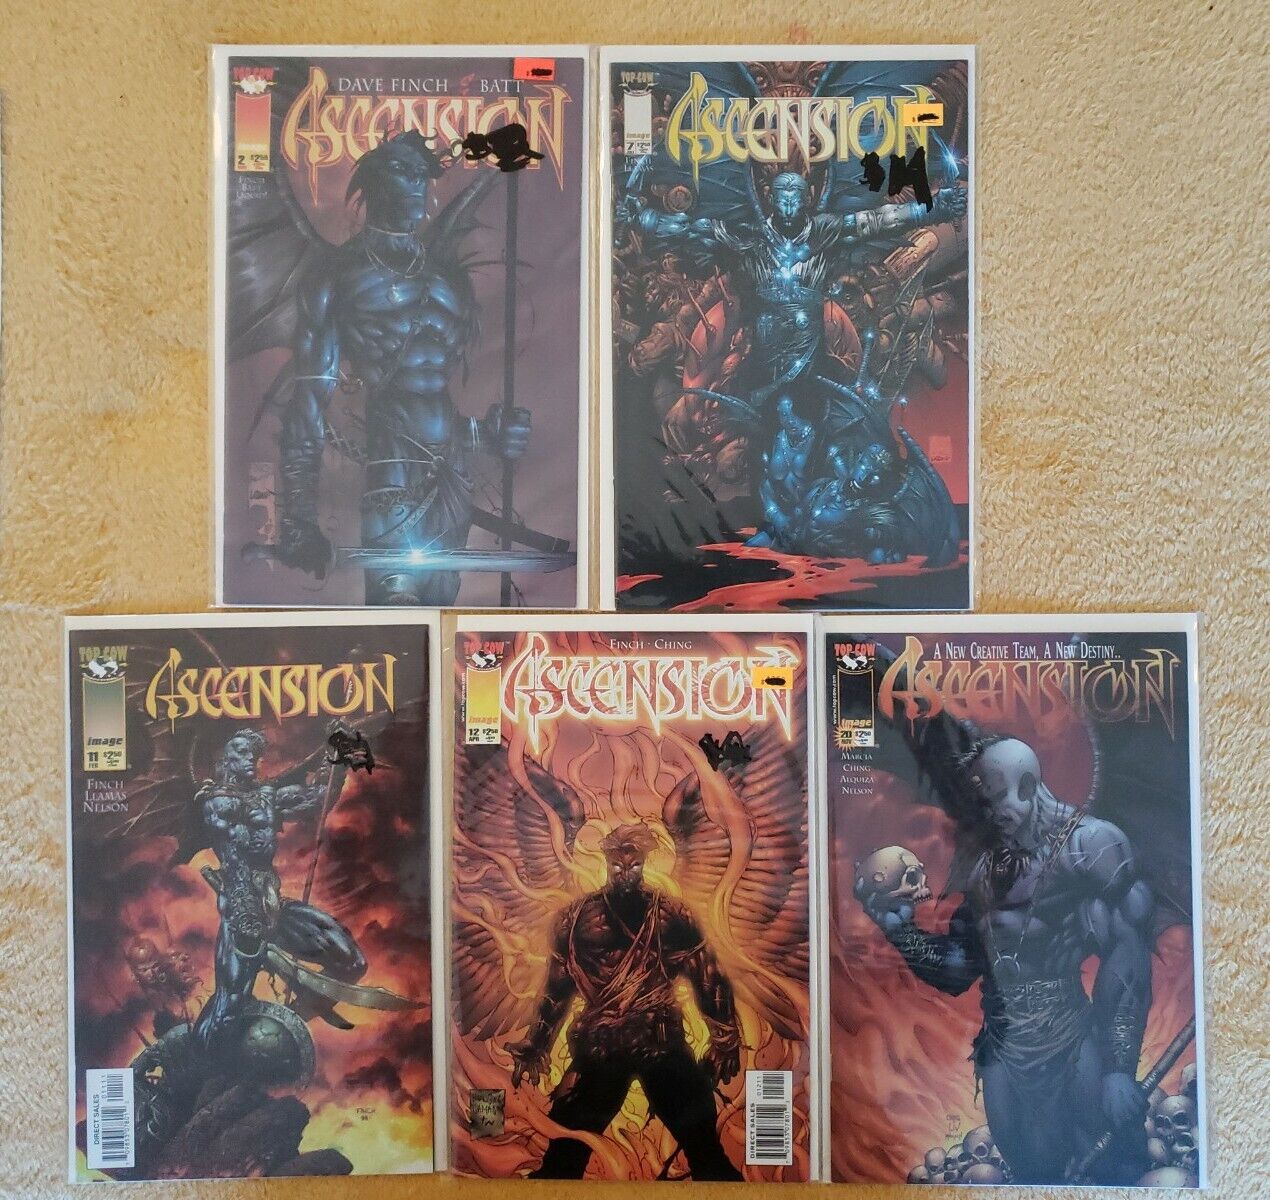 ASCENSION LOT OF 5 ISSUES (1997) IMAGE TOPCOW COMICS DAVID FINCH